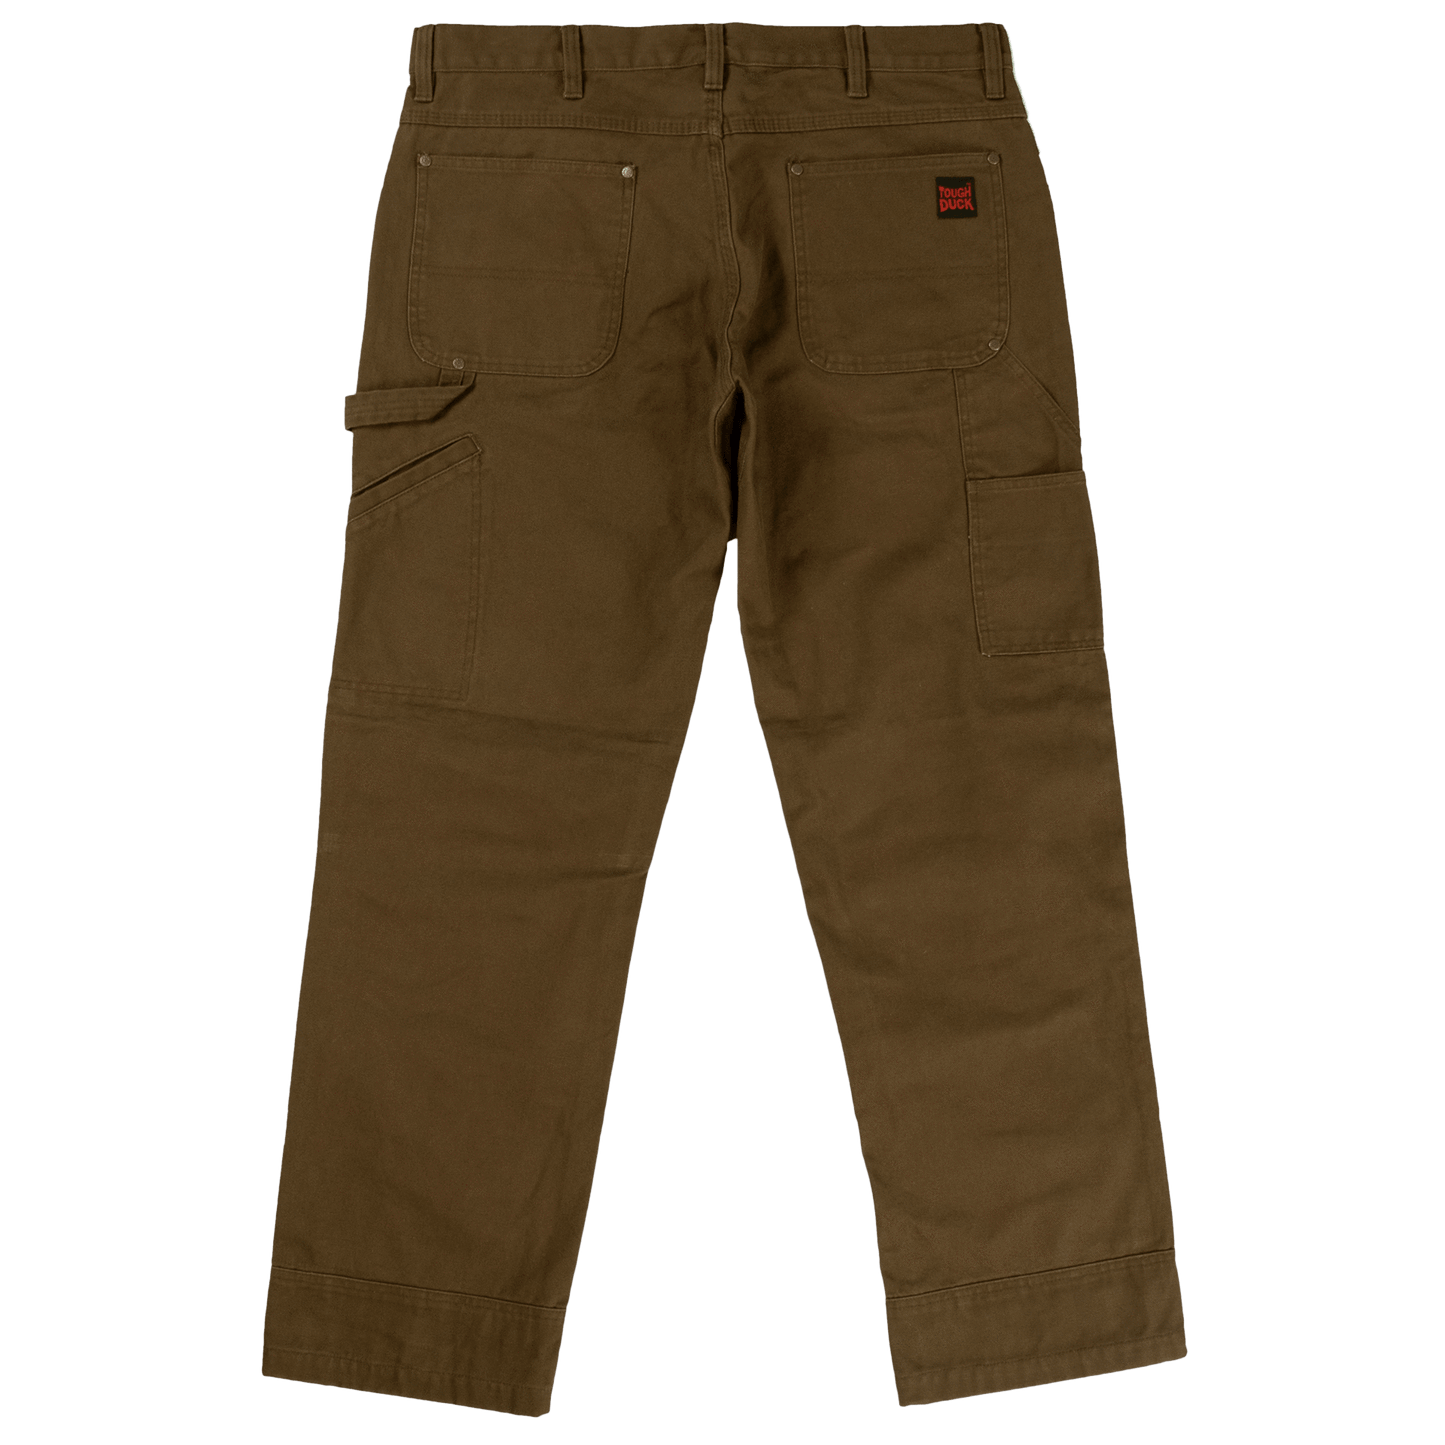 Tough Duck Washed Duck Pants - WP02 - Chestnut - back